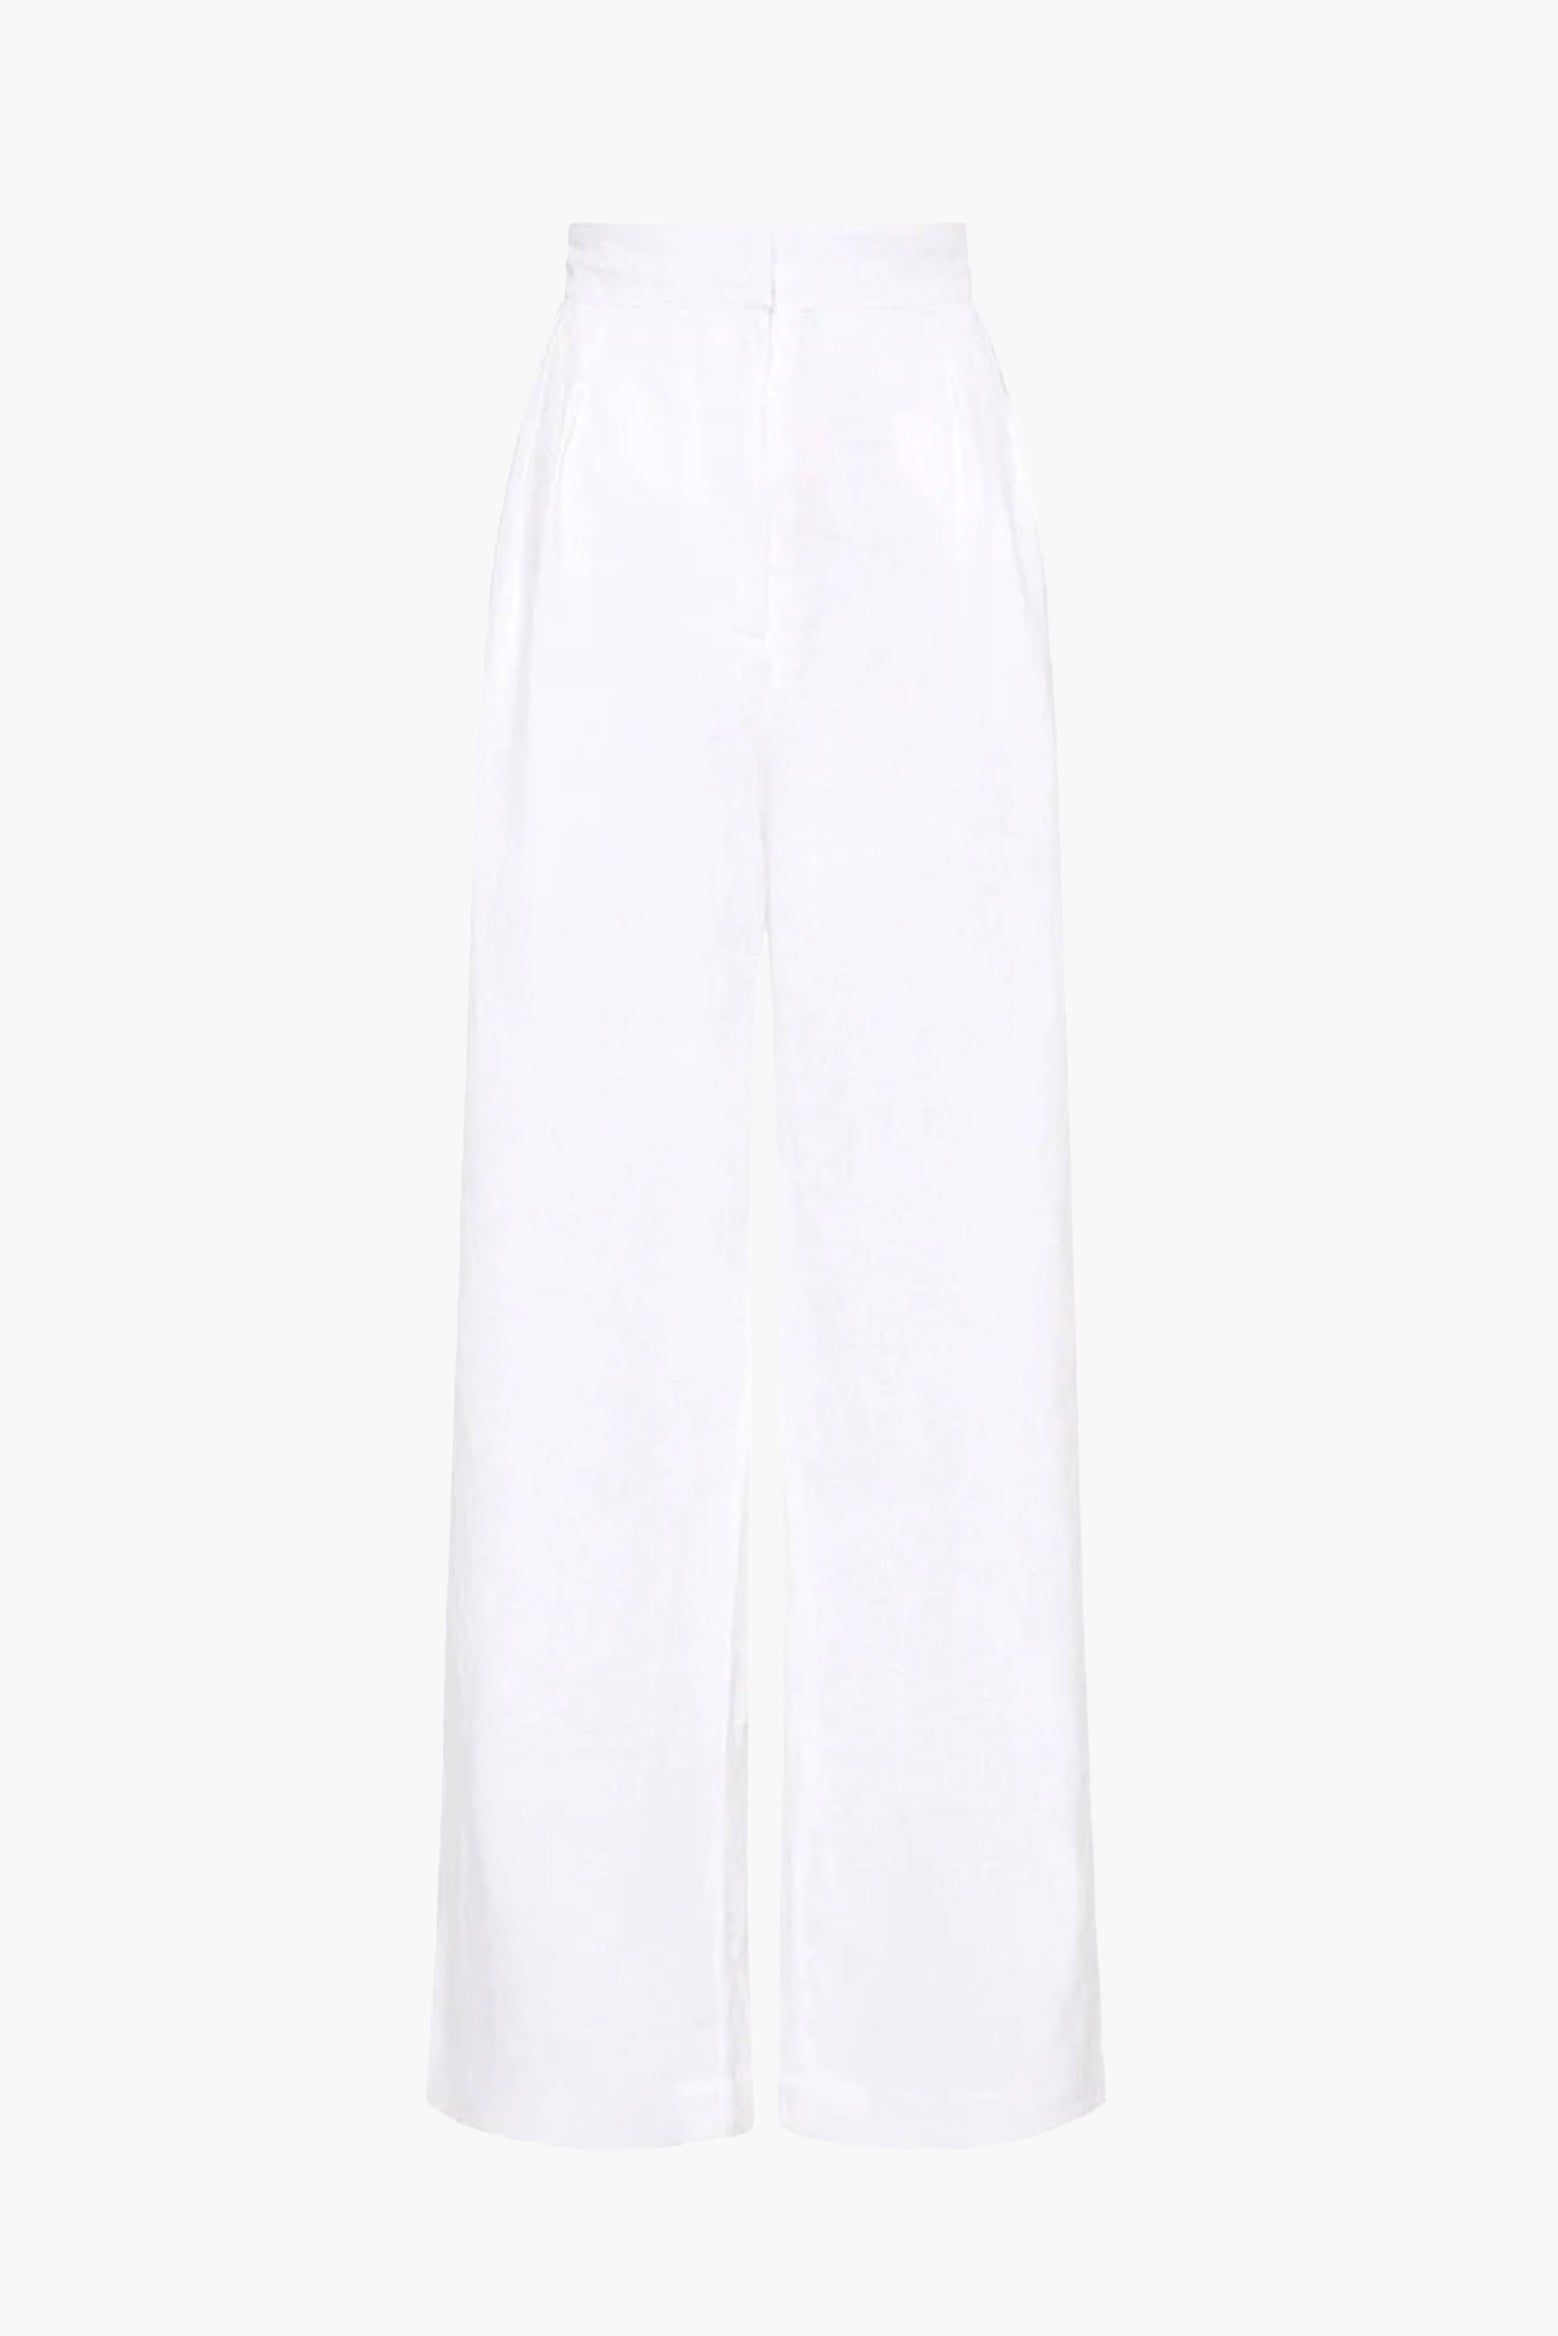 The Faithfull the Brand Duomo Pant in White available at The New Trend Australia